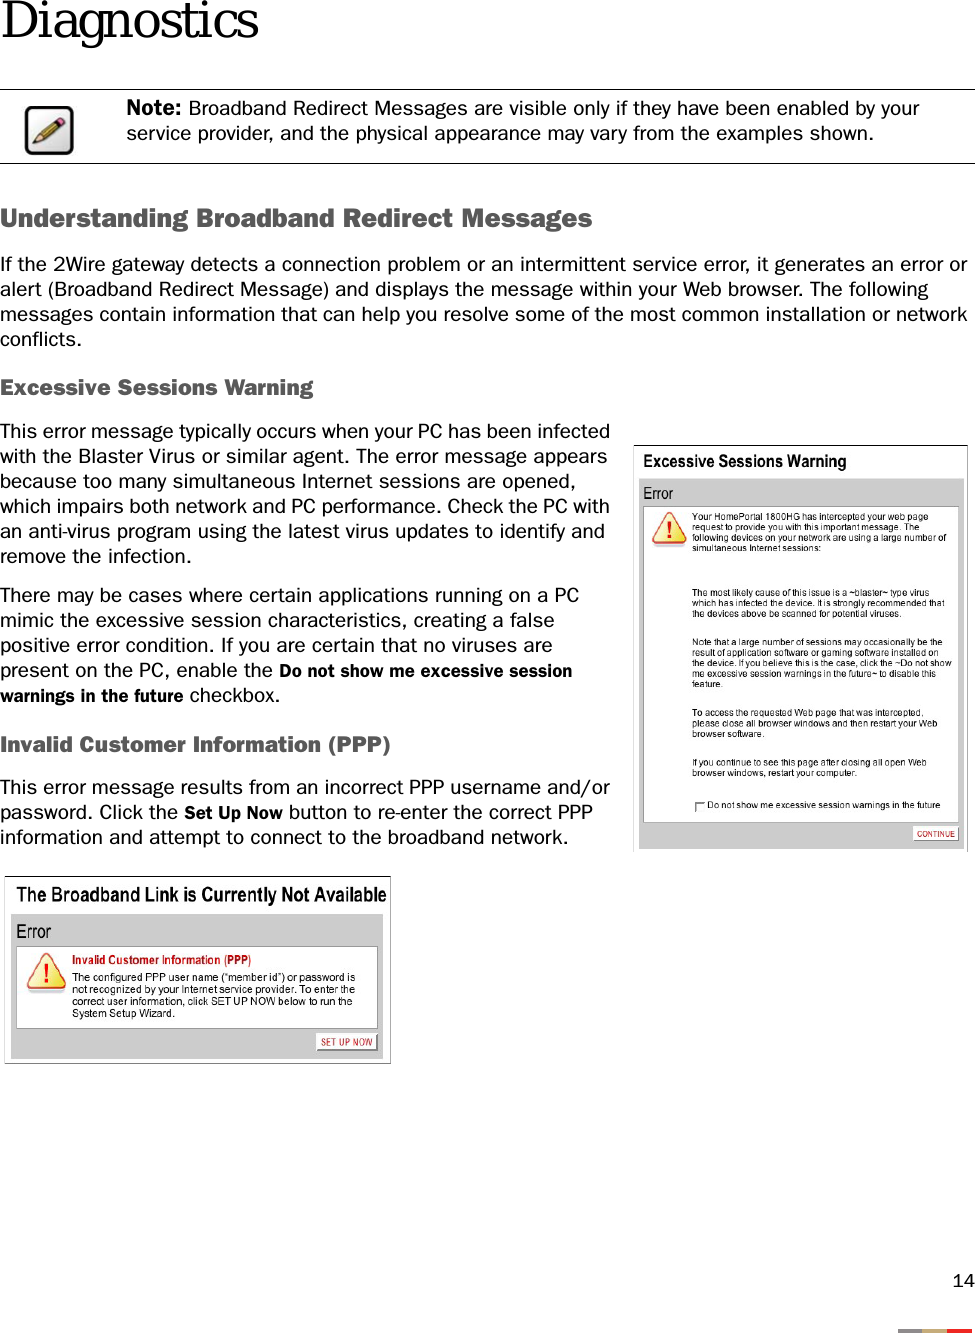 14DiagnosticsUnderstanding Broadband Redirect MessagesIf the 2Wire gateway detects a connection problem or an intermittent service error, it generates an error or alert (Broadband Redirect Message) and displays the message within your Web browser. The following messages contain information that can help you resolve some of the most common installation or network conflicts.Excessive Sessions WarningThis error message typically occurs when your PC has been infected with the Blaster Virus or similar agent. The error message appears because too many simultaneous Internet sessions are opened, which impairs both network and PC performance. Check the PC with an anti-virus program using the latest virus updates to identify and remove the infection.There may be cases where certain applications running on a PC mimic the excessive session characteristics, creating a false positive error condition. If you are certain that no viruses are present on the PC, enable the Do not show me excessive session warnings in the future checkbox.Invalid Customer Information (PPP)This error message results from an incorrect PPP username and/or password. Click the Set Up Now button to re-enter the correct PPP information and attempt to connect to the broadband network.Note: Broadband Redirect Messages are visible only if they have been enabled by your service provider, and the physical appearance may vary from the examples shown.